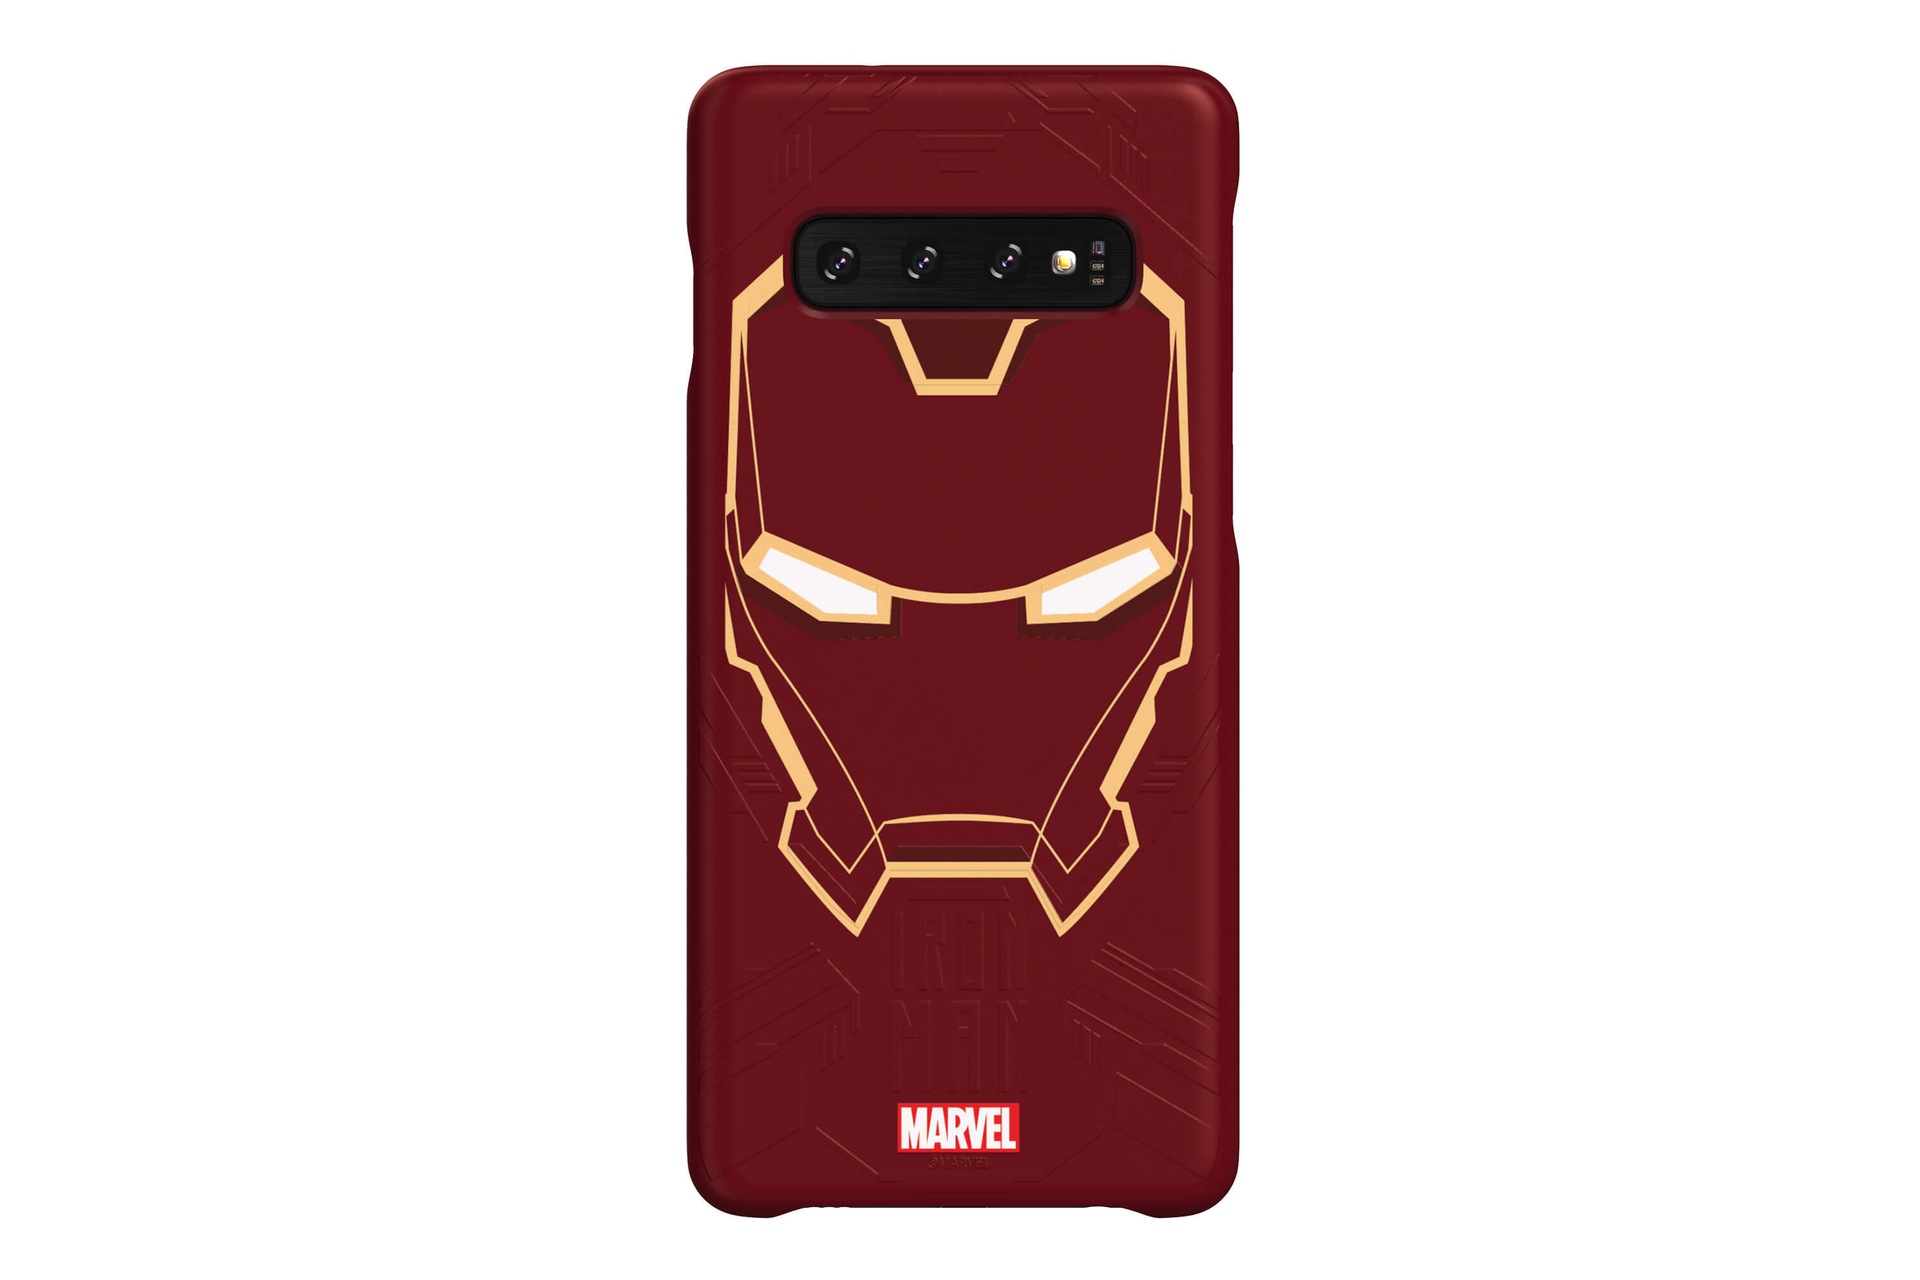 Space Cleaner Samsung S10 Case